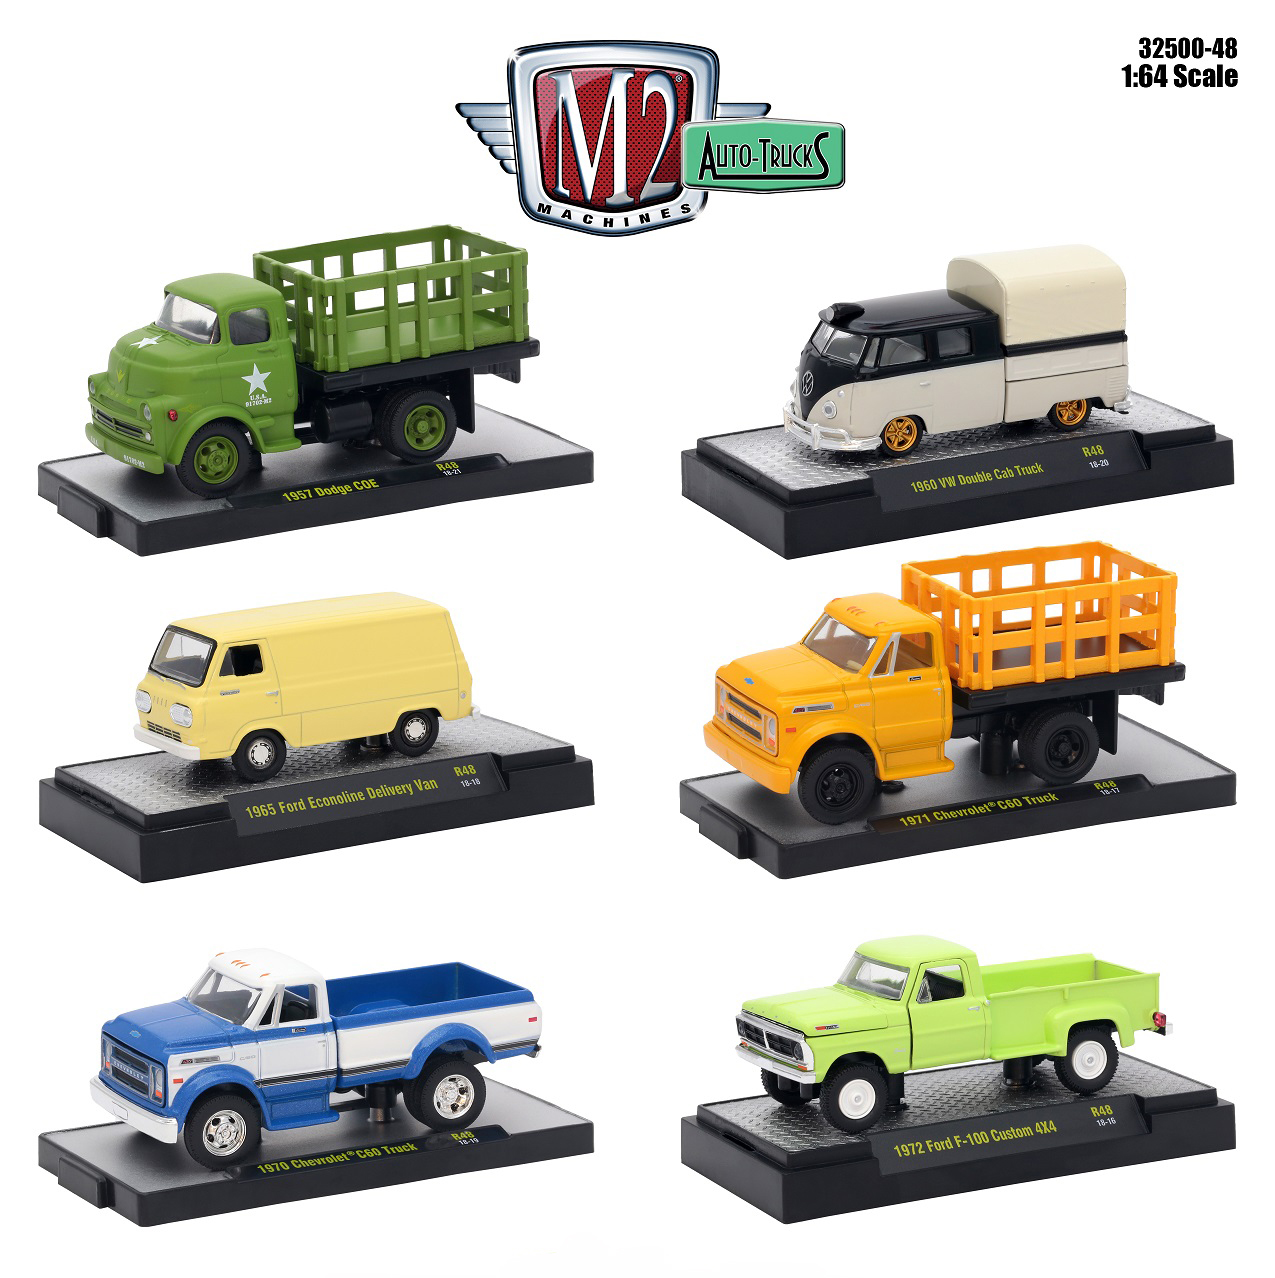 Auto Trucks 6 Piece Set Release 48 IN DISPLAY CASES 1/64 Diecast Model Cars by M2 Machines